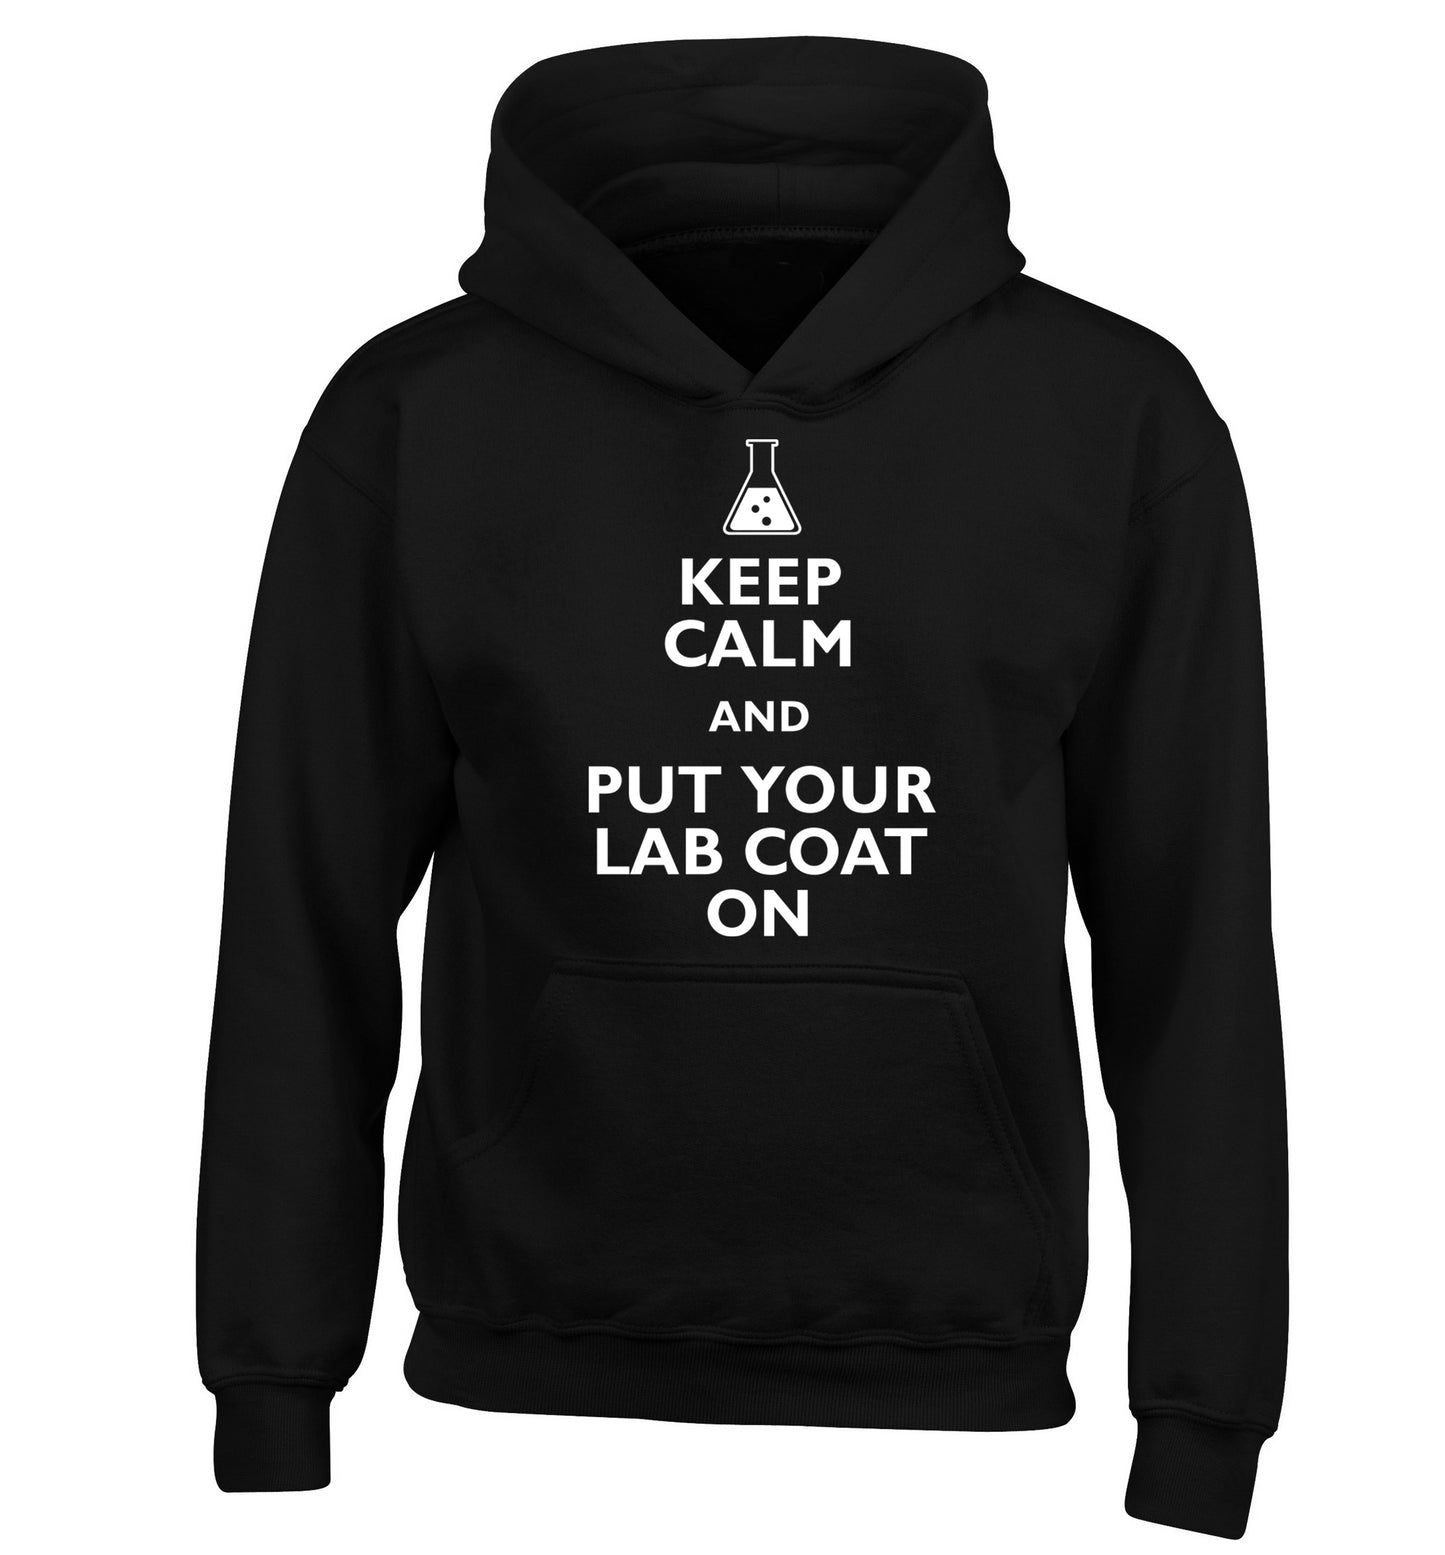 Keep calm and put your lab coat on children's black hoodie 12-14 Years